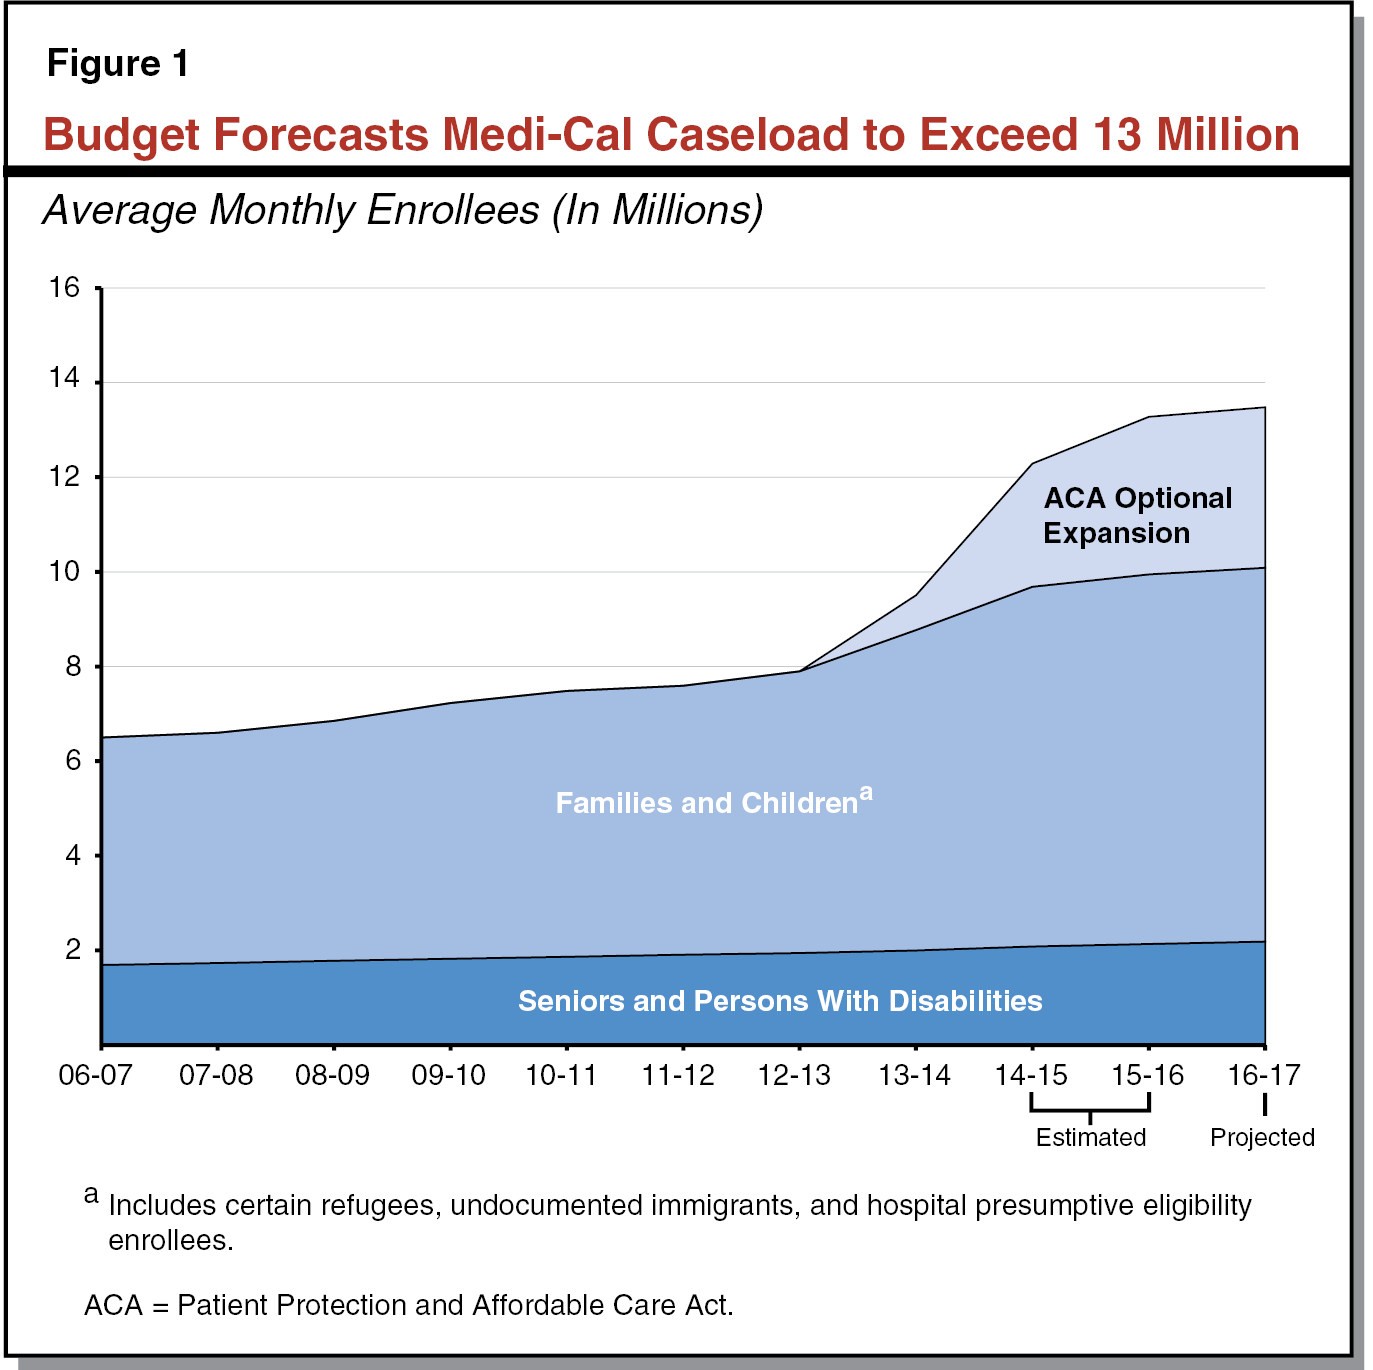 Figure 1 - Budget Forecasts Medi-Cal Caseload to Exceed 13 Million